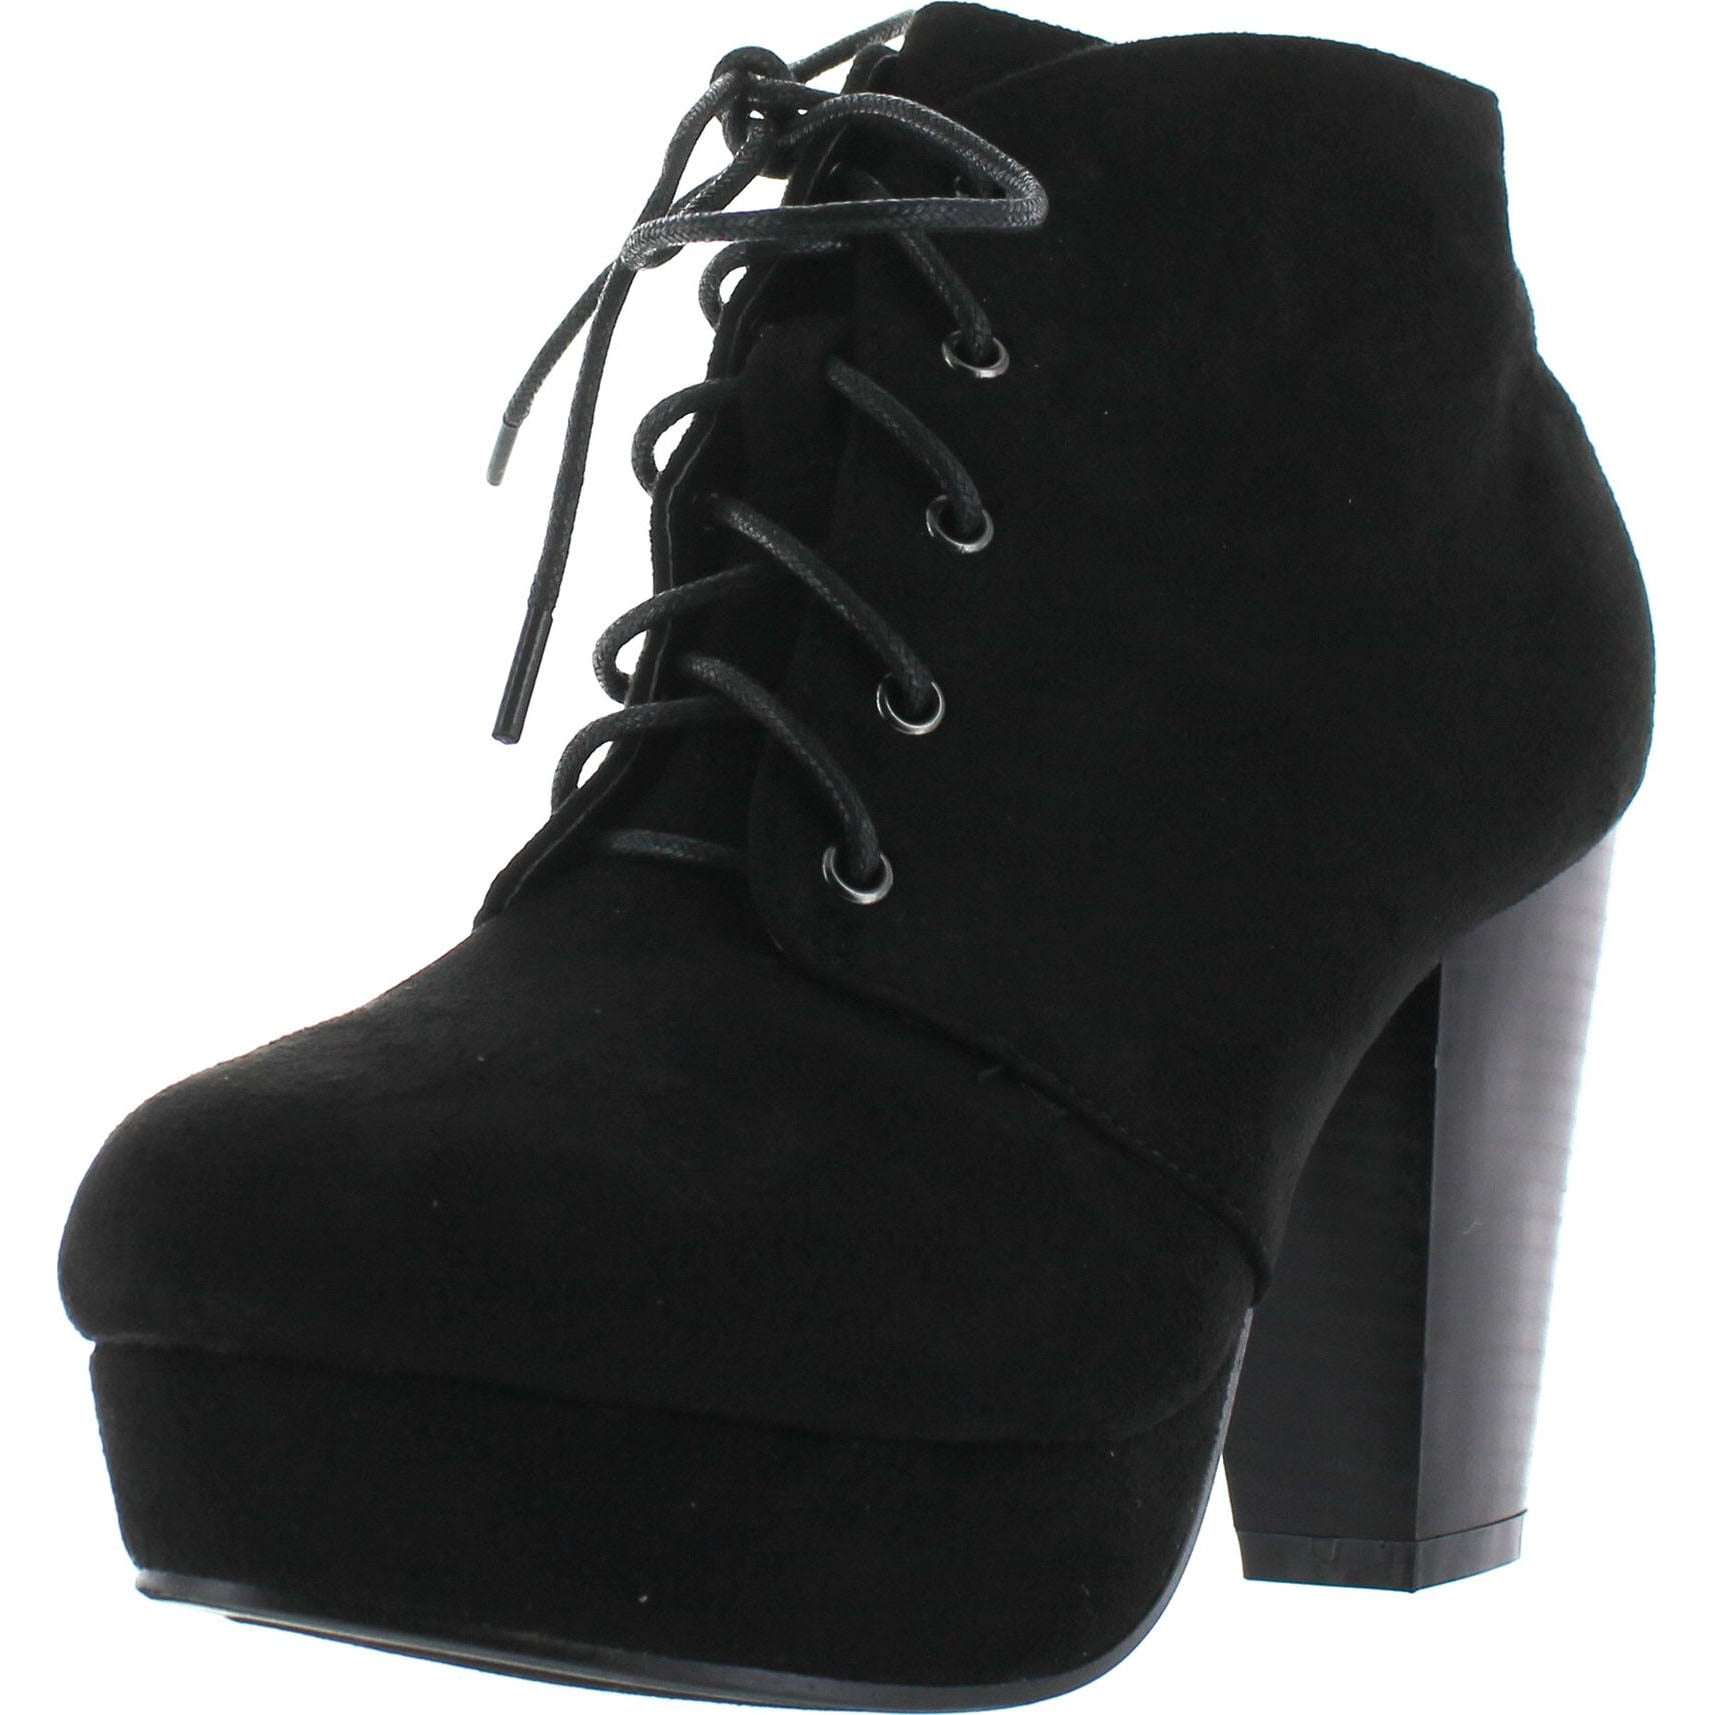 lace up ankle boots chunky heel